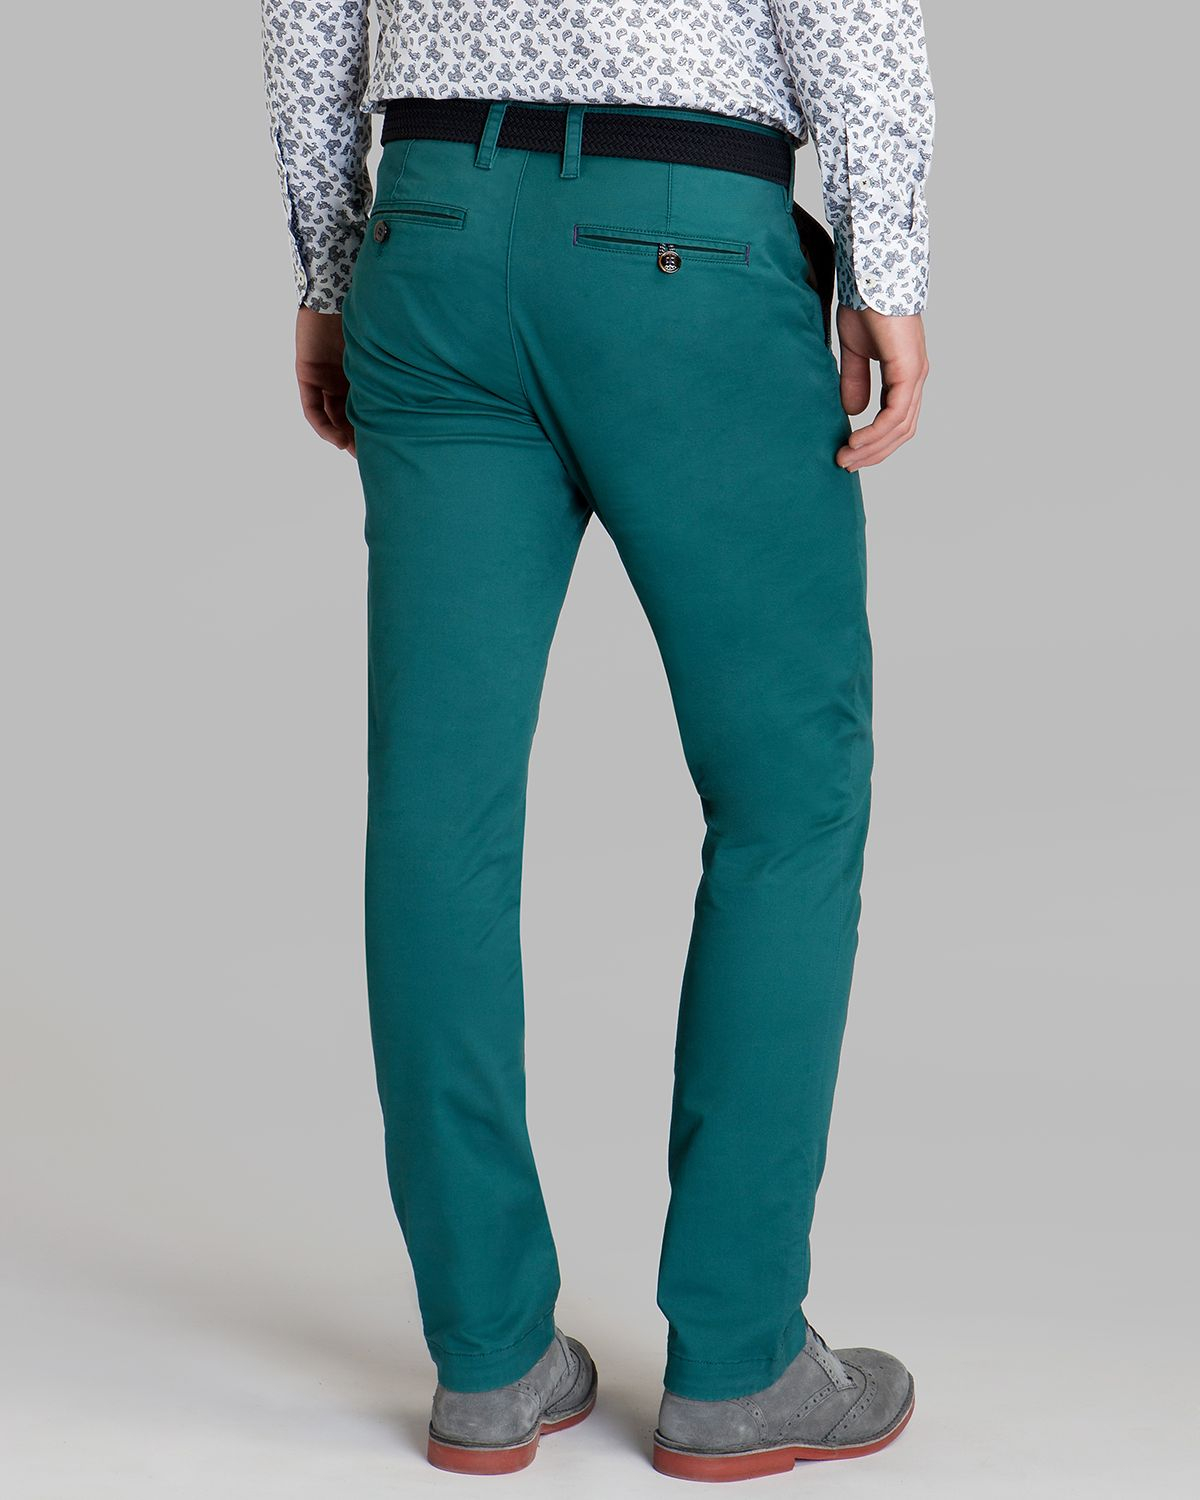 Lyst - Ted Baker Bronn Classic Fit Chino Pants in Blue for Men